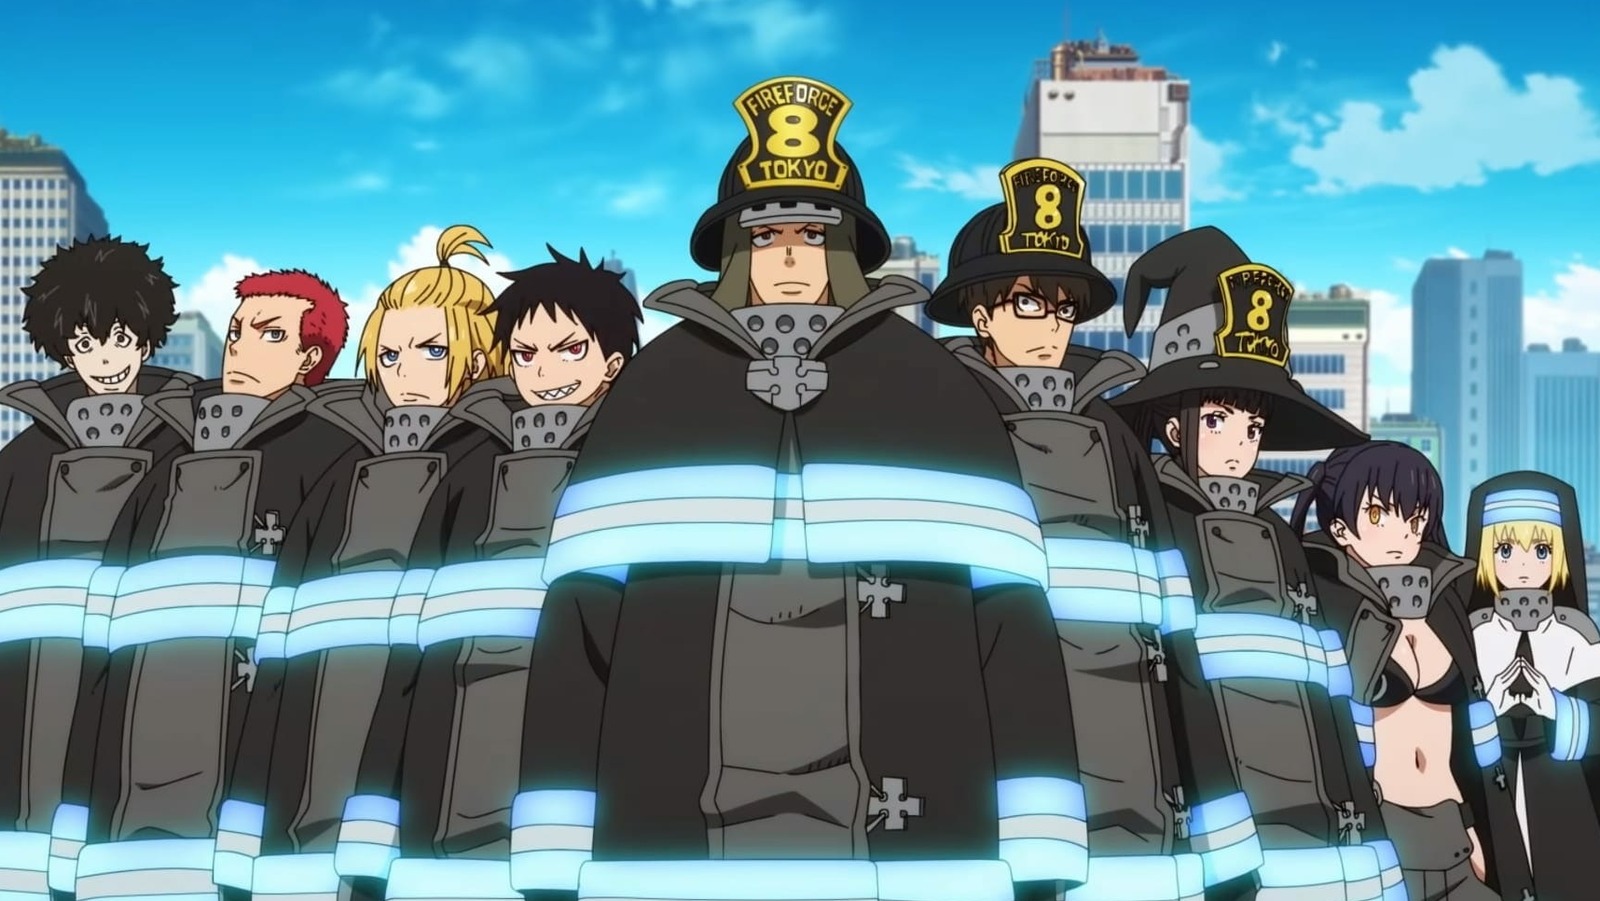 Fire Force Season 3 Development Details, Rumors And More